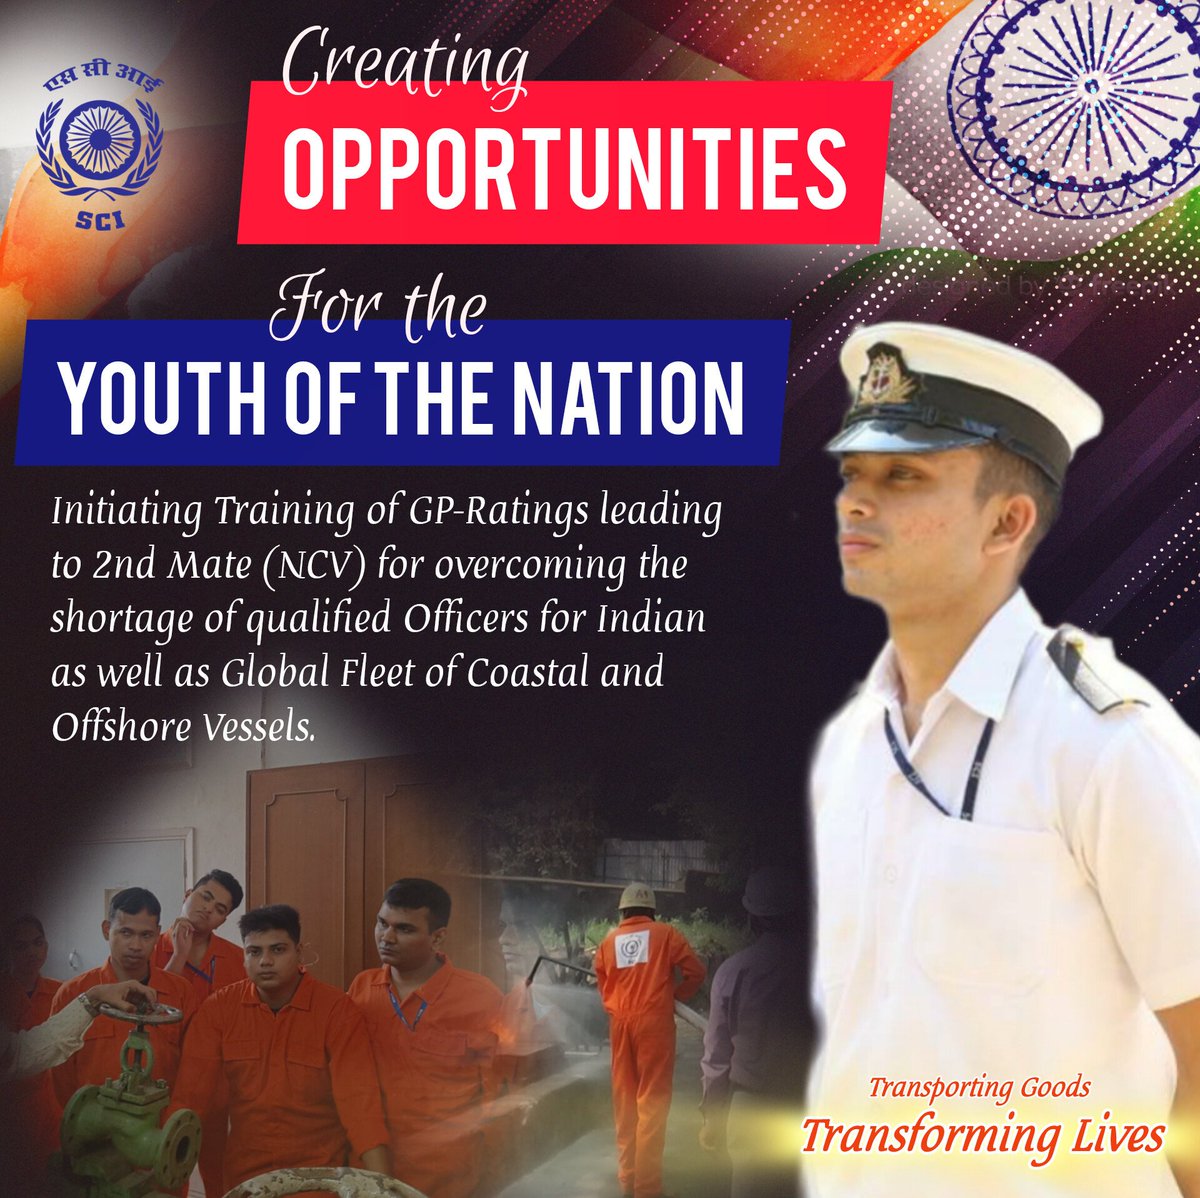 SCI has been #TransformingLives of the Youth of the Nation by creating career opportunities in the Maritime Industry. One such new addition is the induction of GP Ratings leading to 2nd Mate (NCV) as per demand of Indian as well as Global Coastal & Offshore Fleet. @shipmin_india